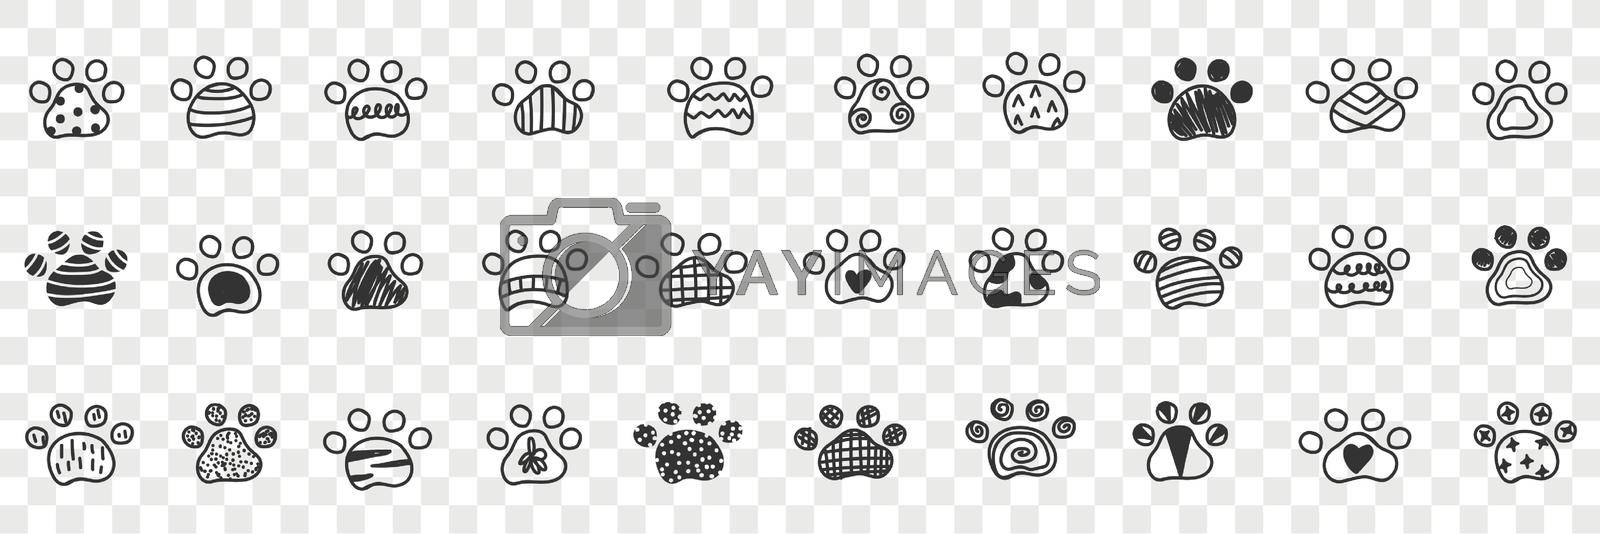 Animals paws footprints doodle set. Collection of hand drawn footprints imprints of animals dogs with various patterns in rows isolated on transparent background